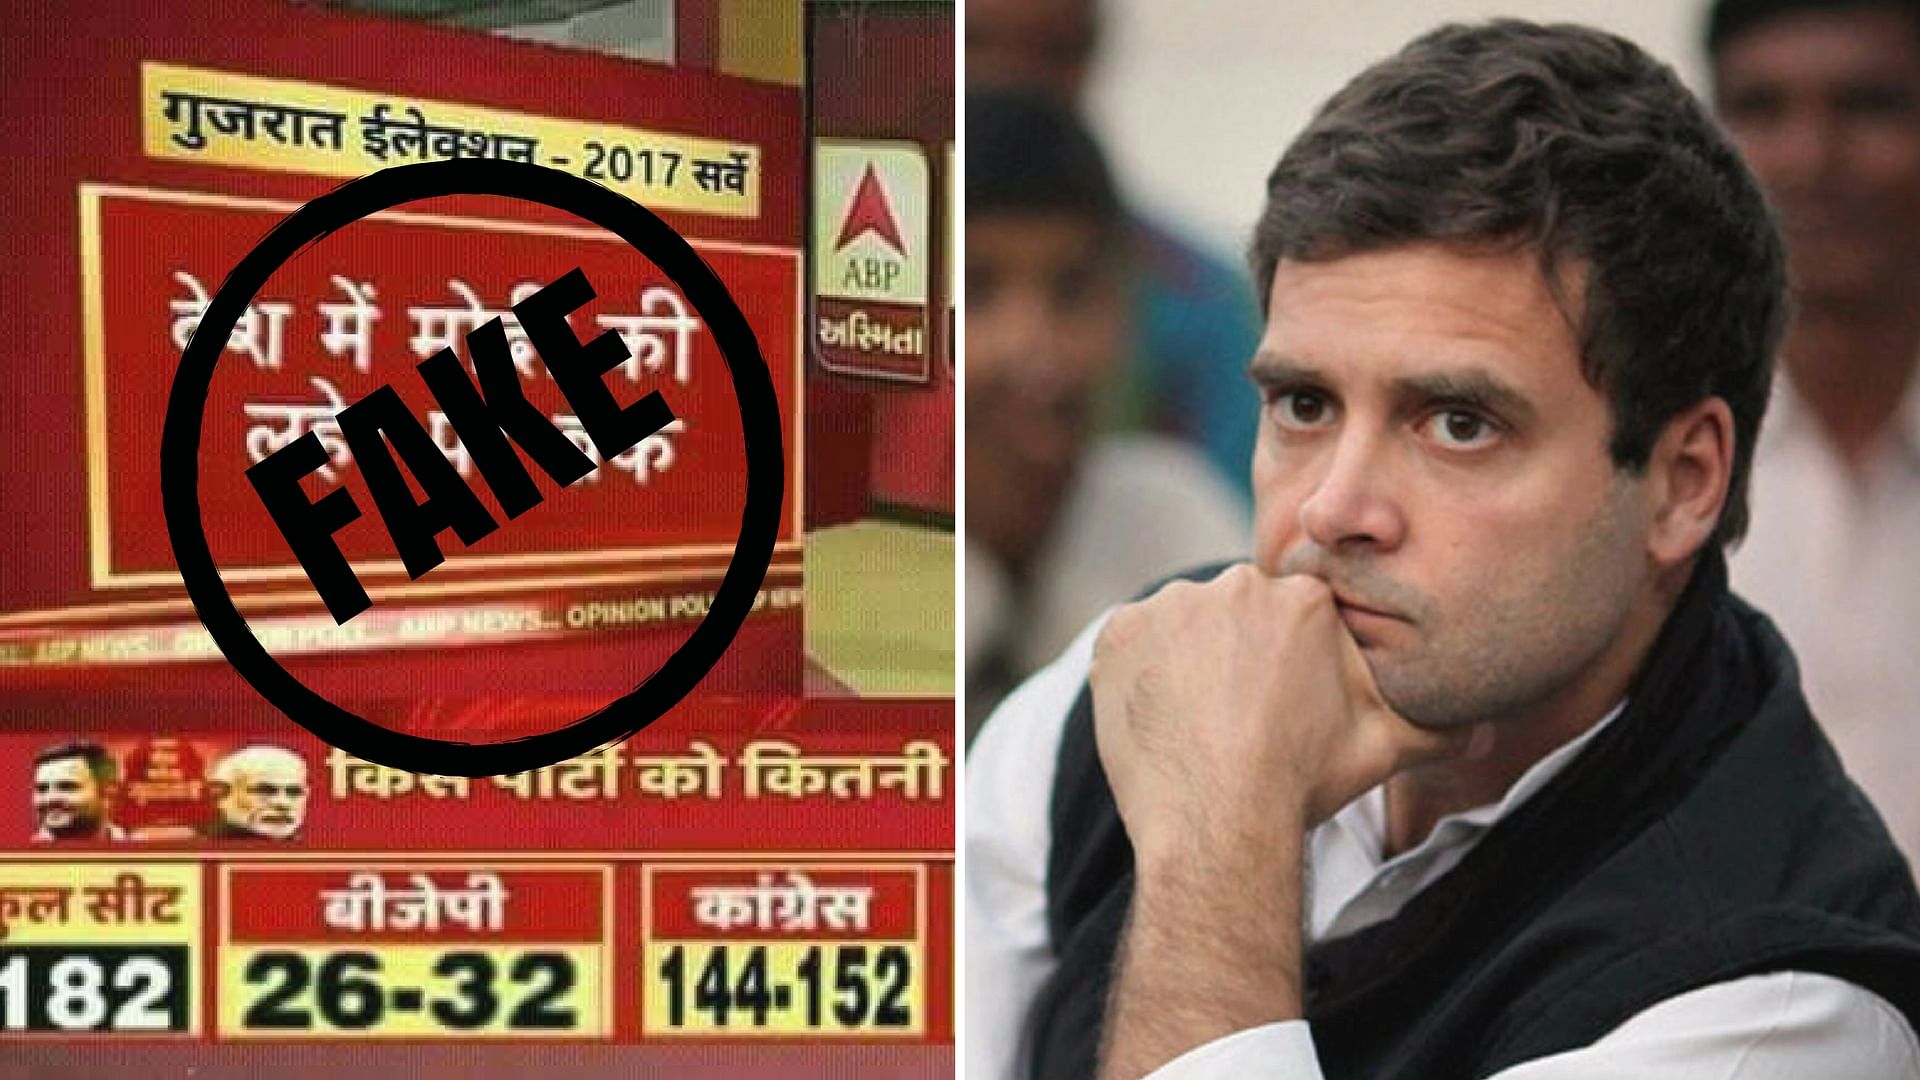 As Gujarat gears up for the much-awaited assembly elections, a fake image has gone viral on the social media that predicts a big win for the Congress.